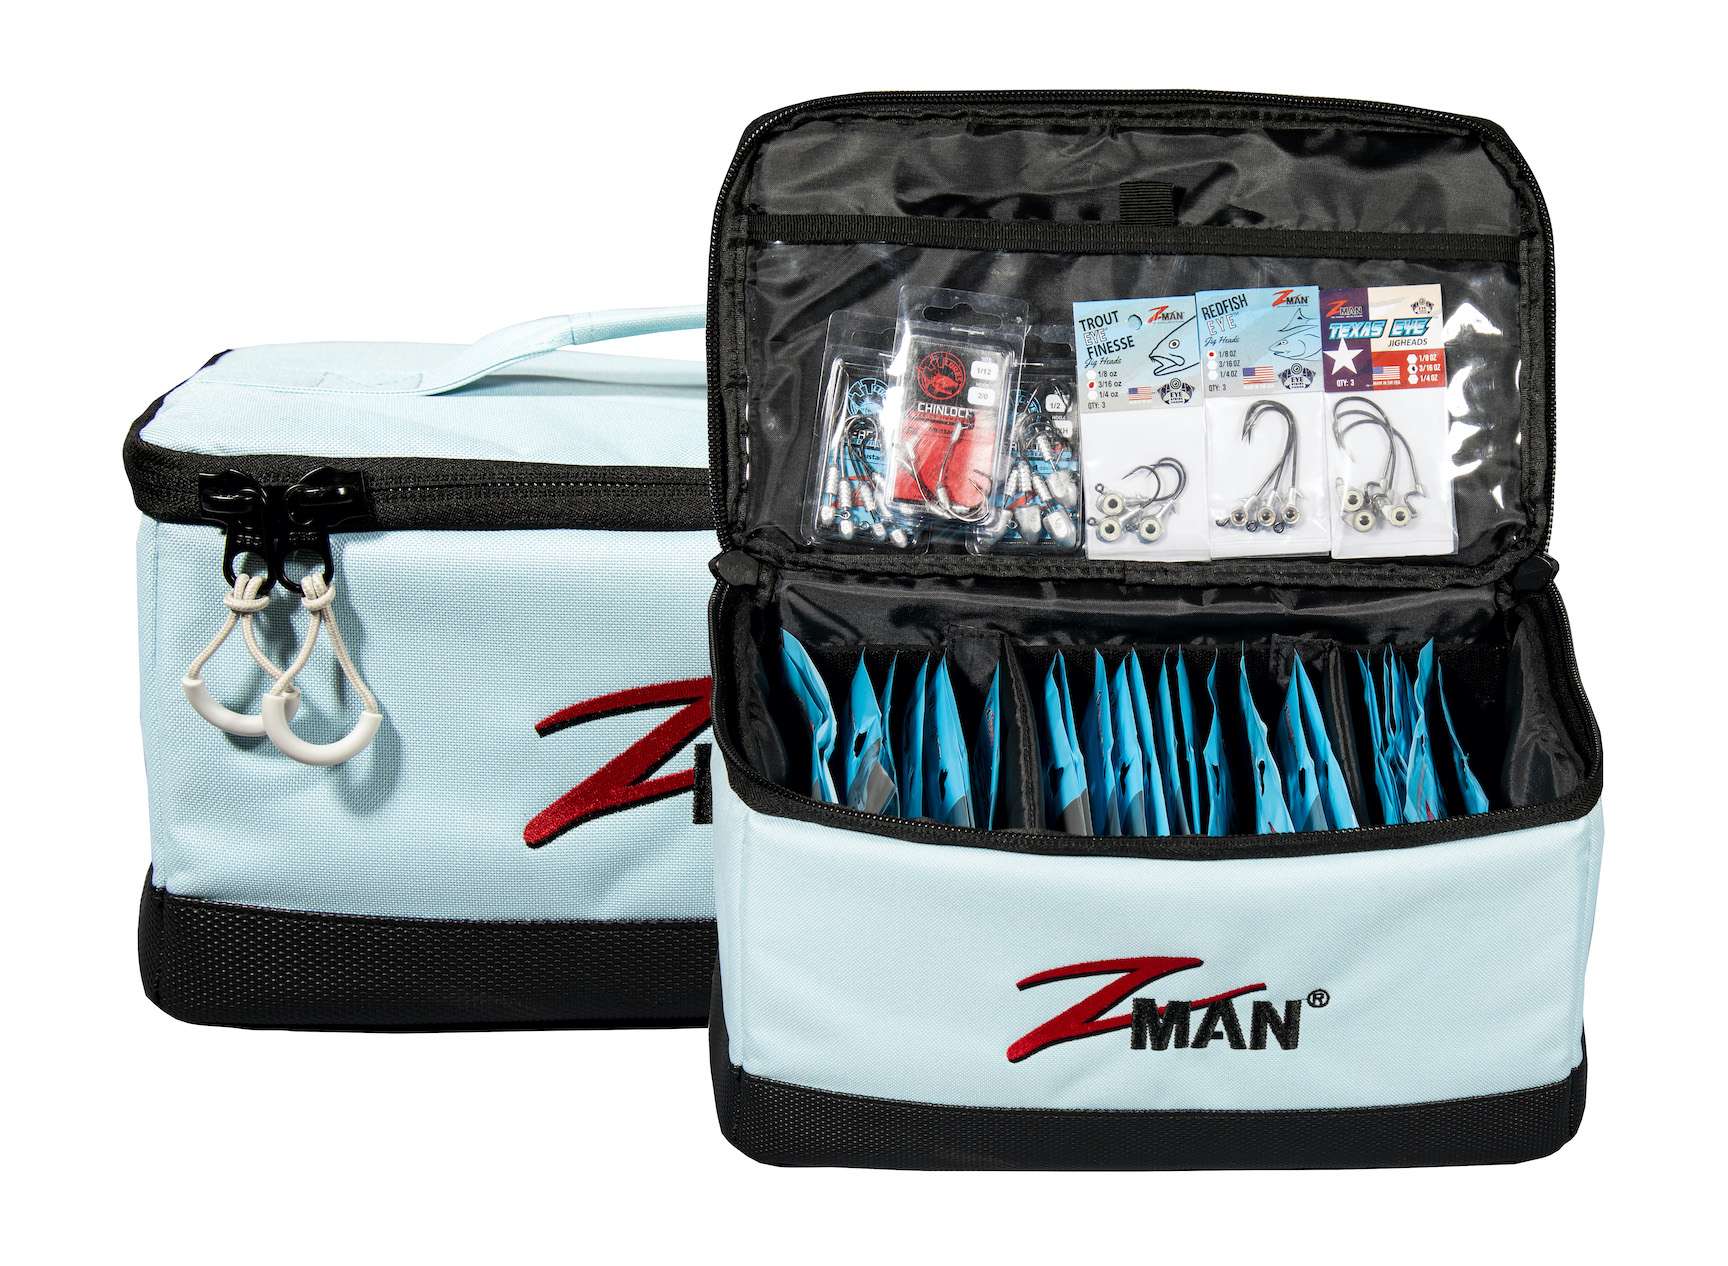 The Z-Man Bait BlockZ might be the best solution for storing bags of ElaZtech baits in orderly, accessible rows.